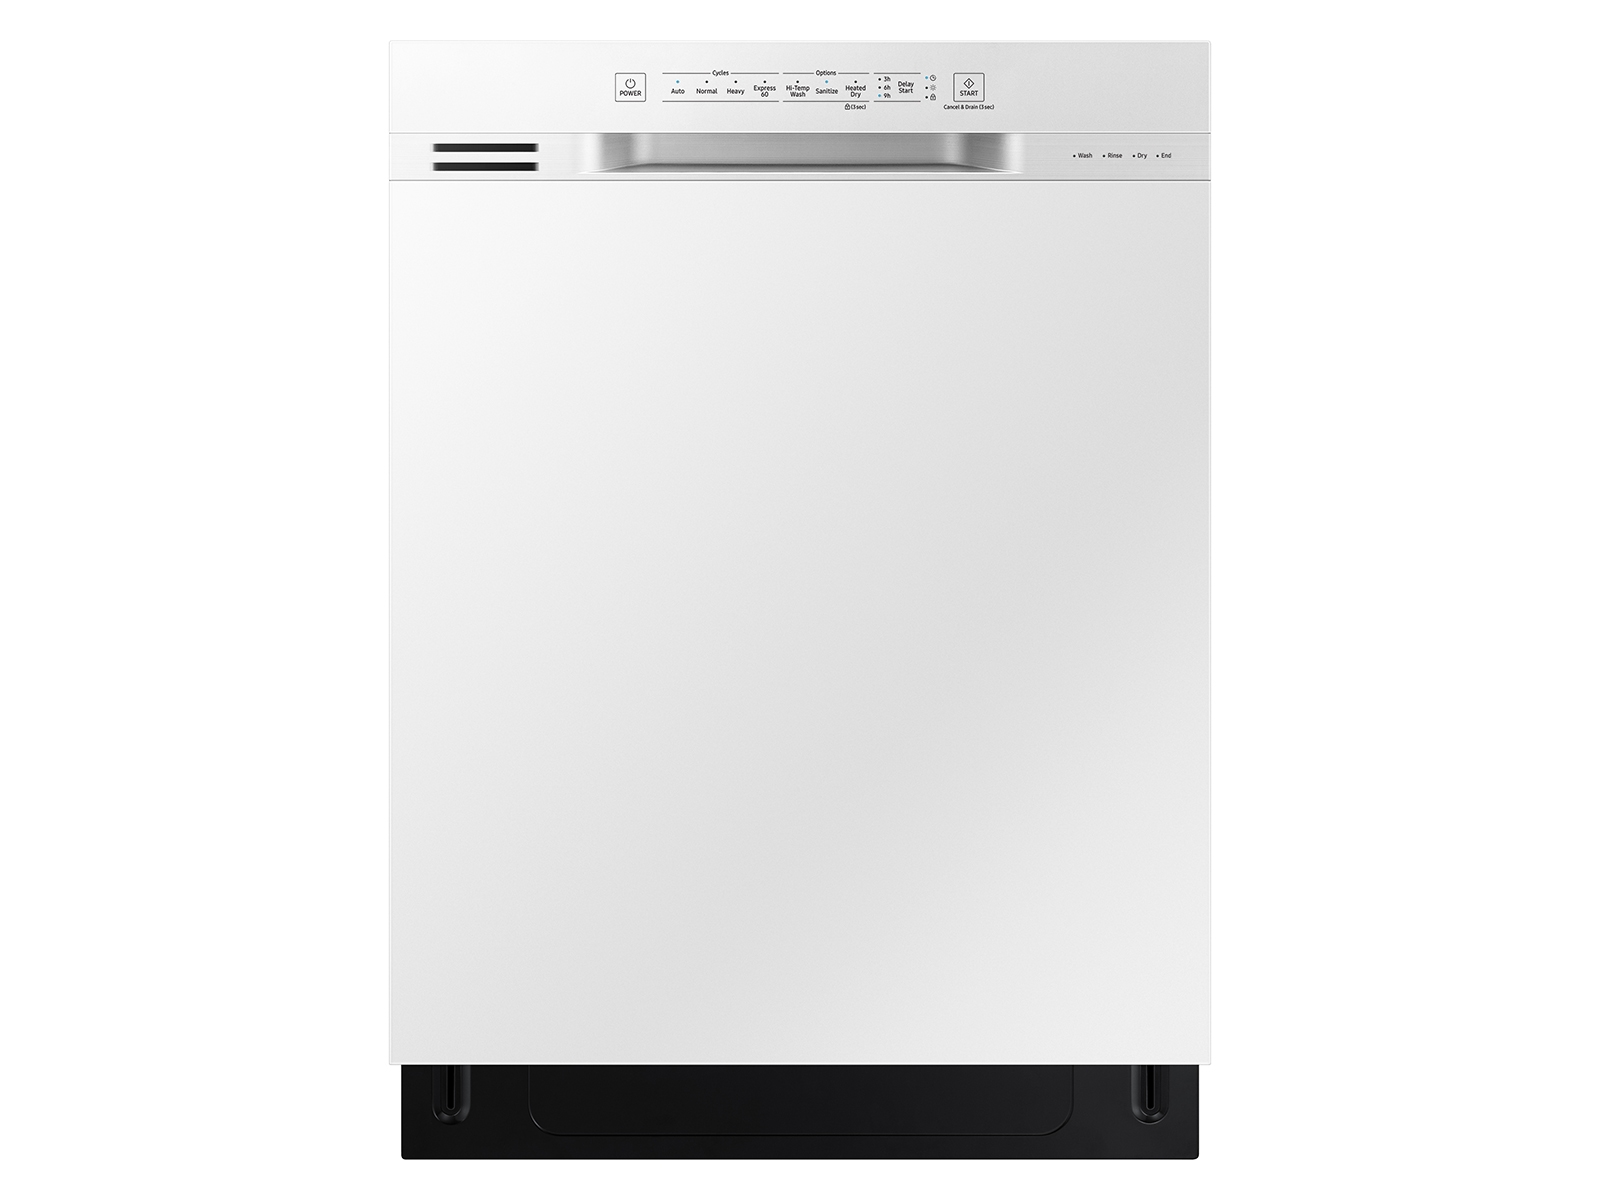 Samsung Front Control Dishwasher with Hybrid Interior in White